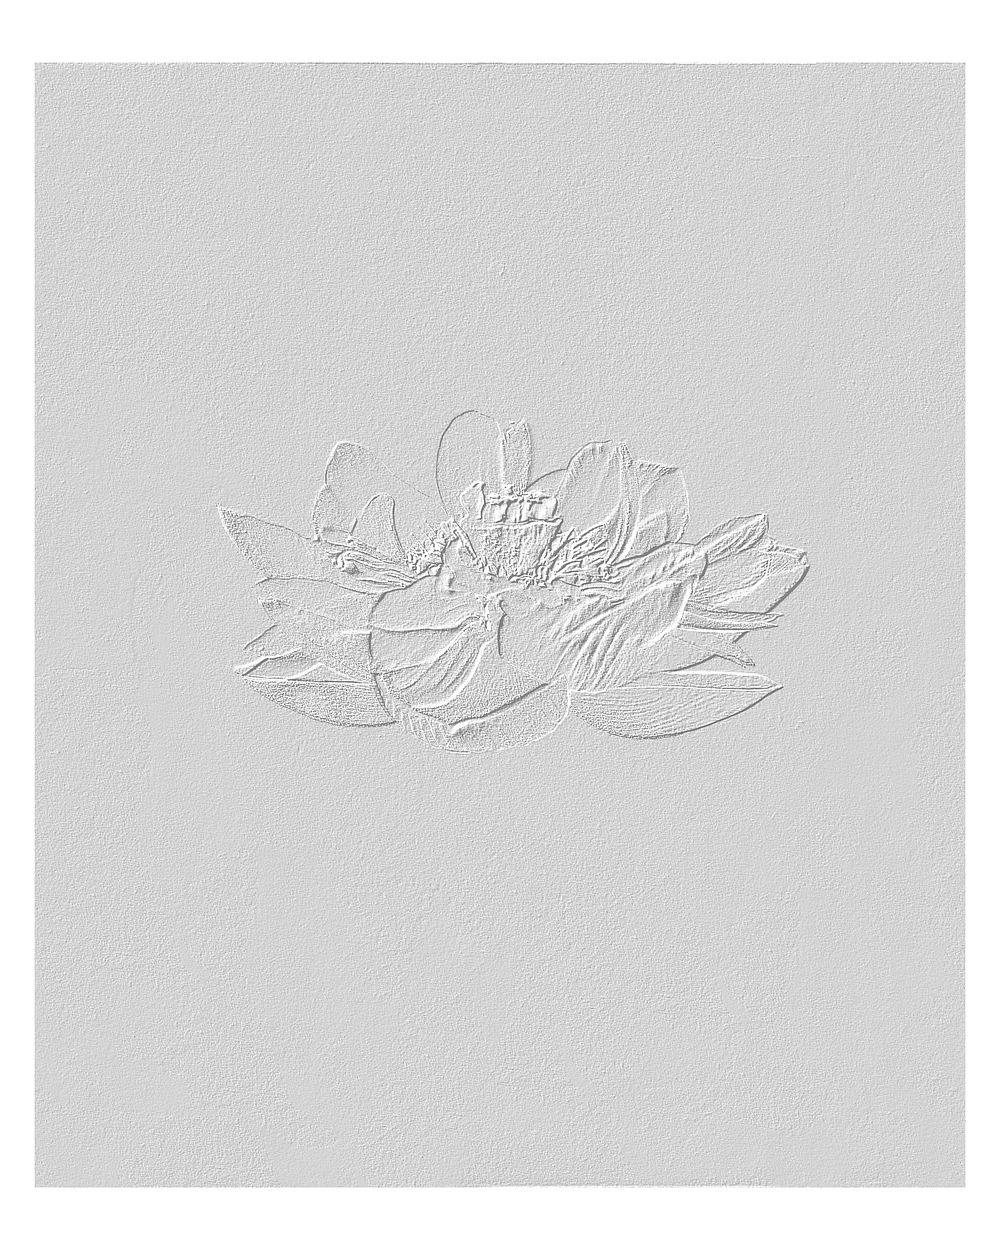 Lotus flowers artwork vintage wall art print and poster design remix from original photography by Ogawa Kazumasa.